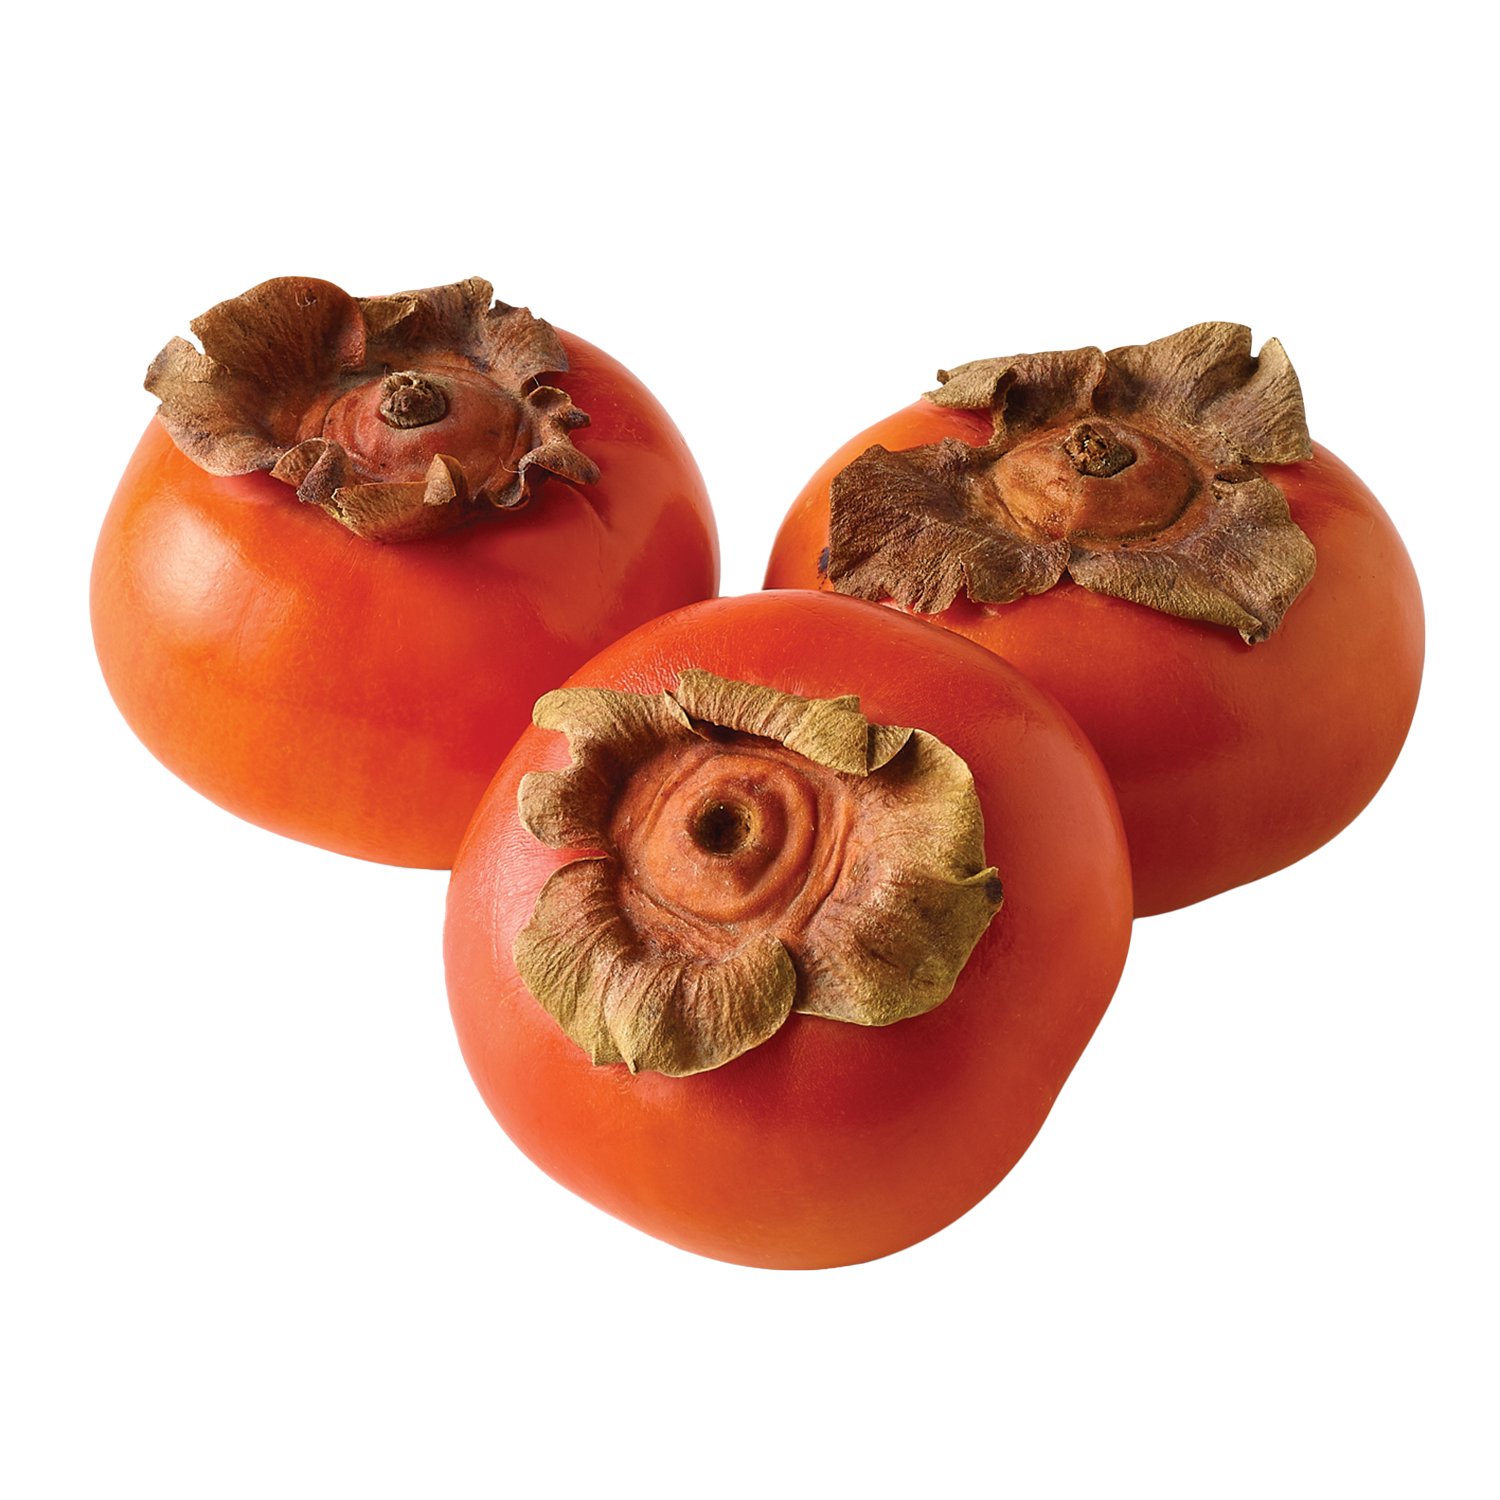 fresh persimmons - shop specialty and exotic fruit at heb